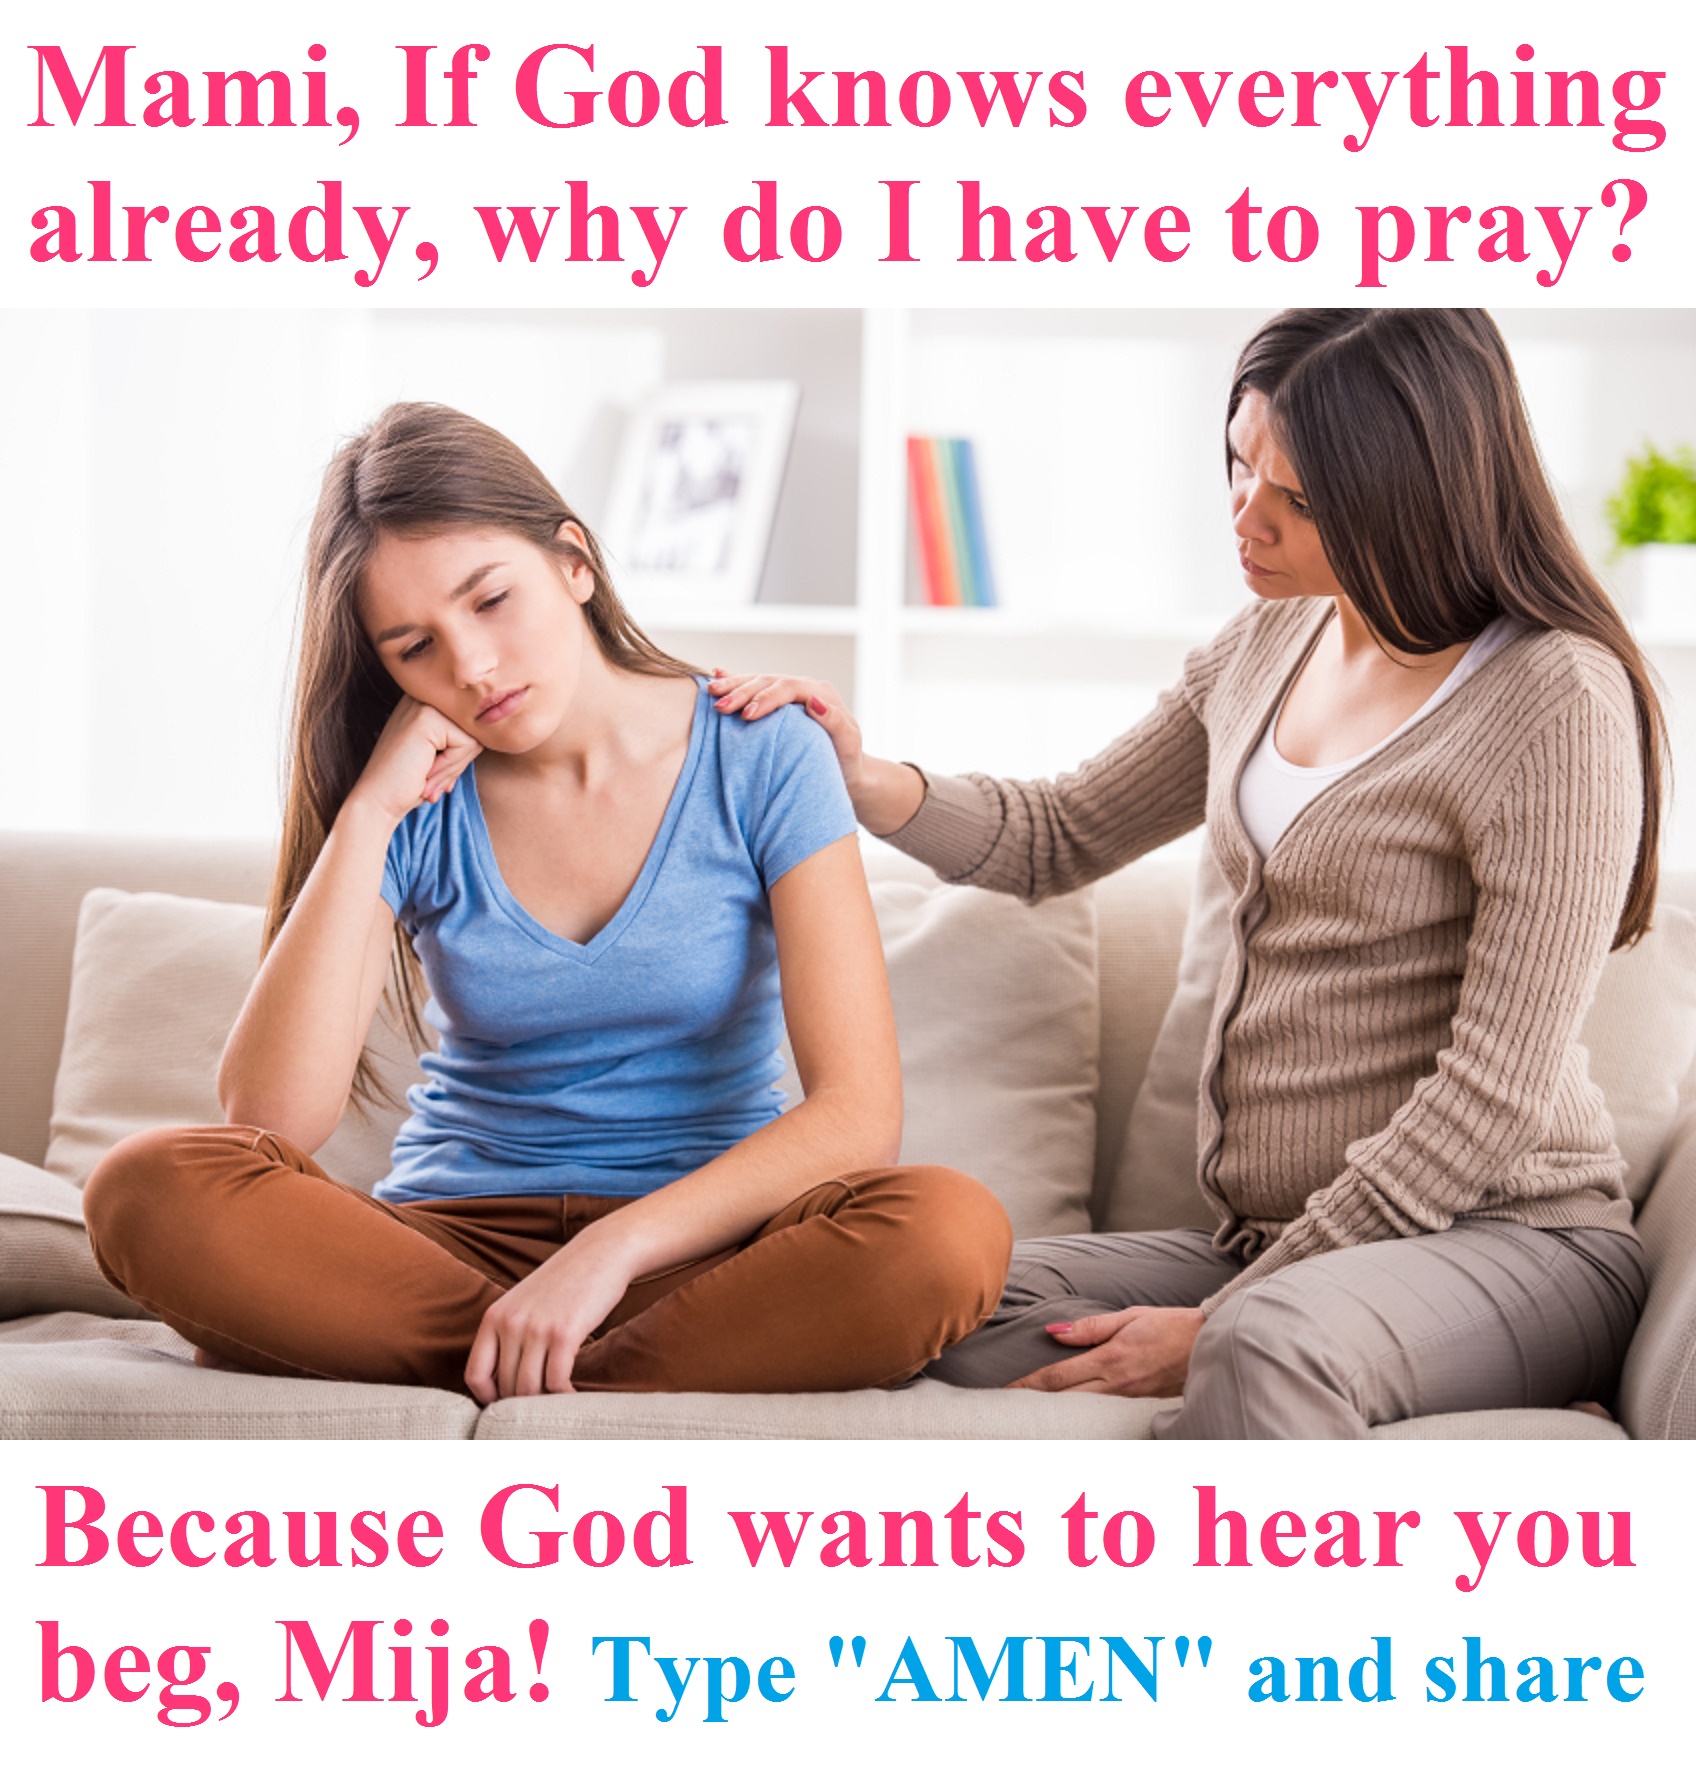 Because God wants to hear you beg, Mija! Type "AMEN" and share